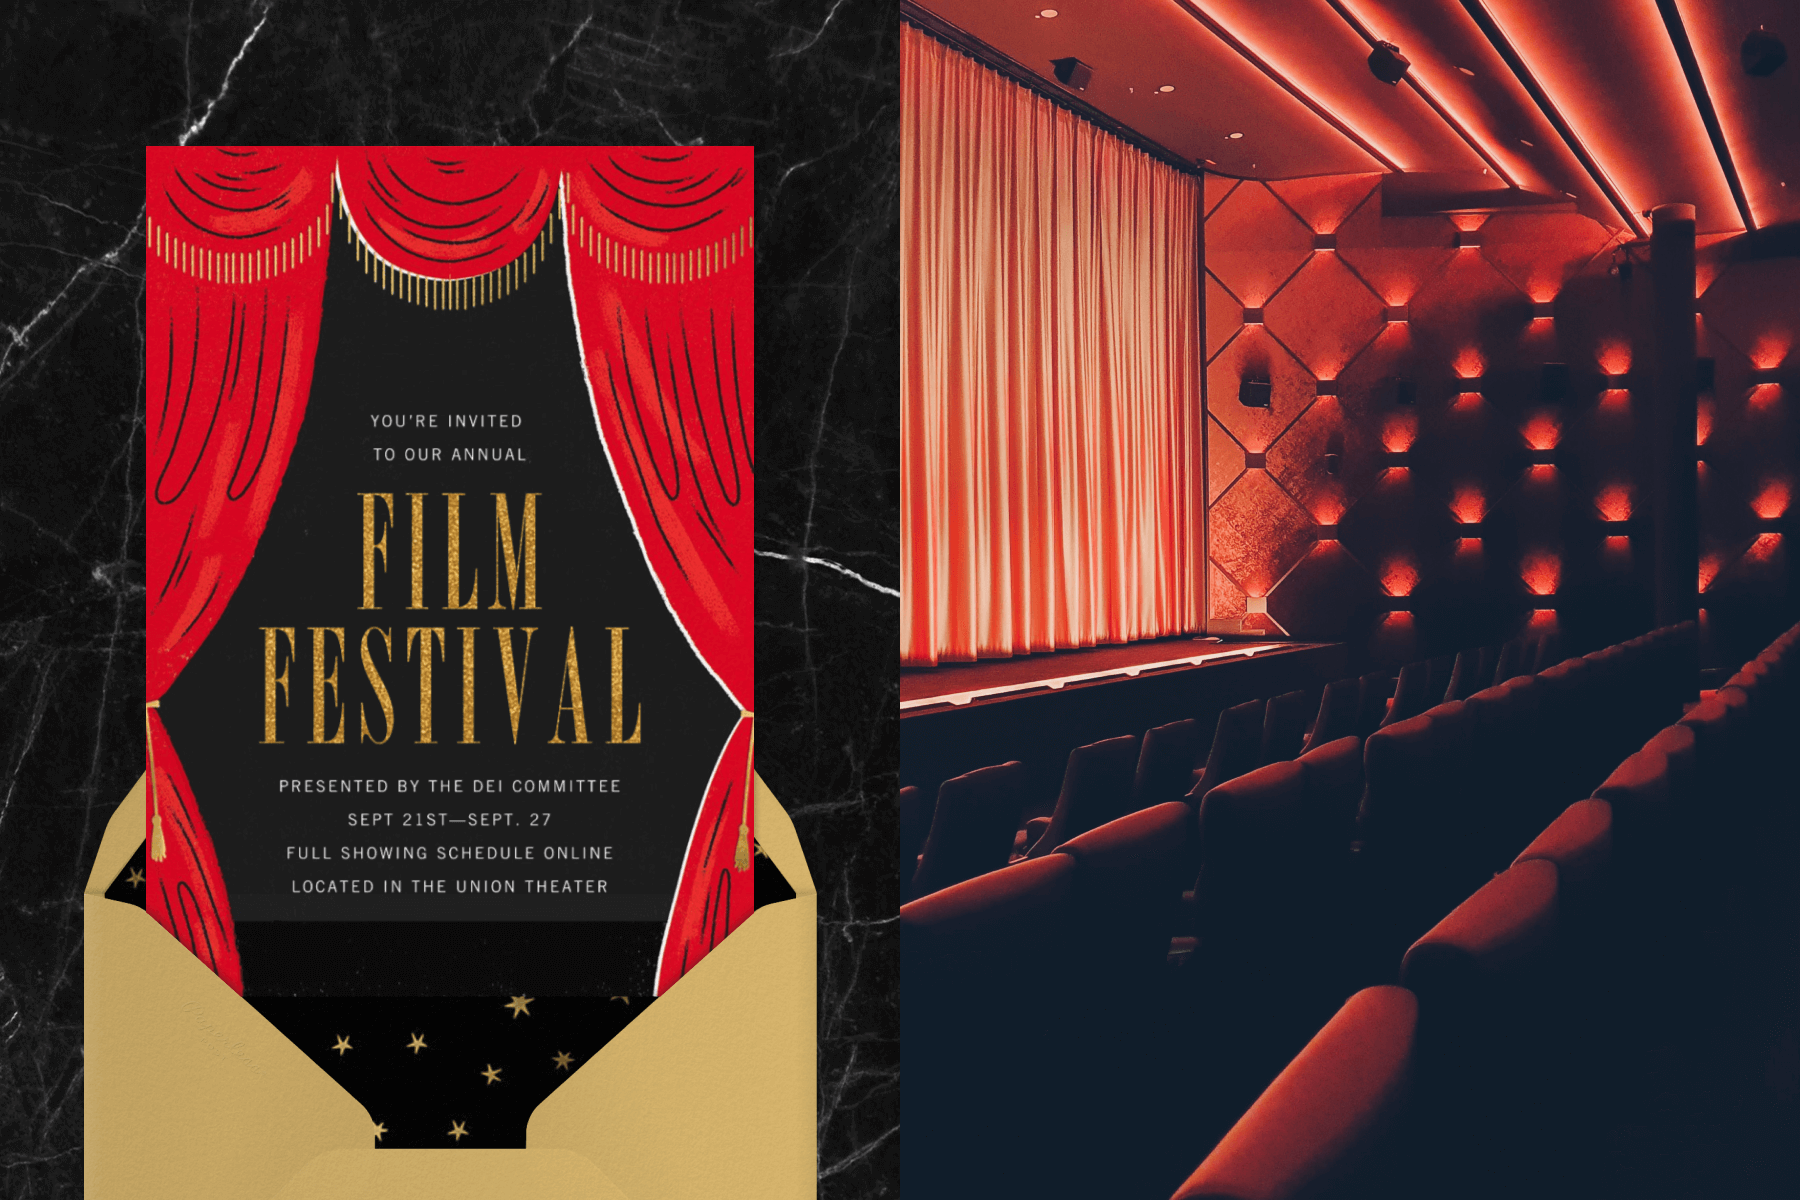 Left: An invitation with red theater curtains as a border and black in the middle with the words “Film Festival” in gold glitter letters. Right: A darkened auditorium with red lights.